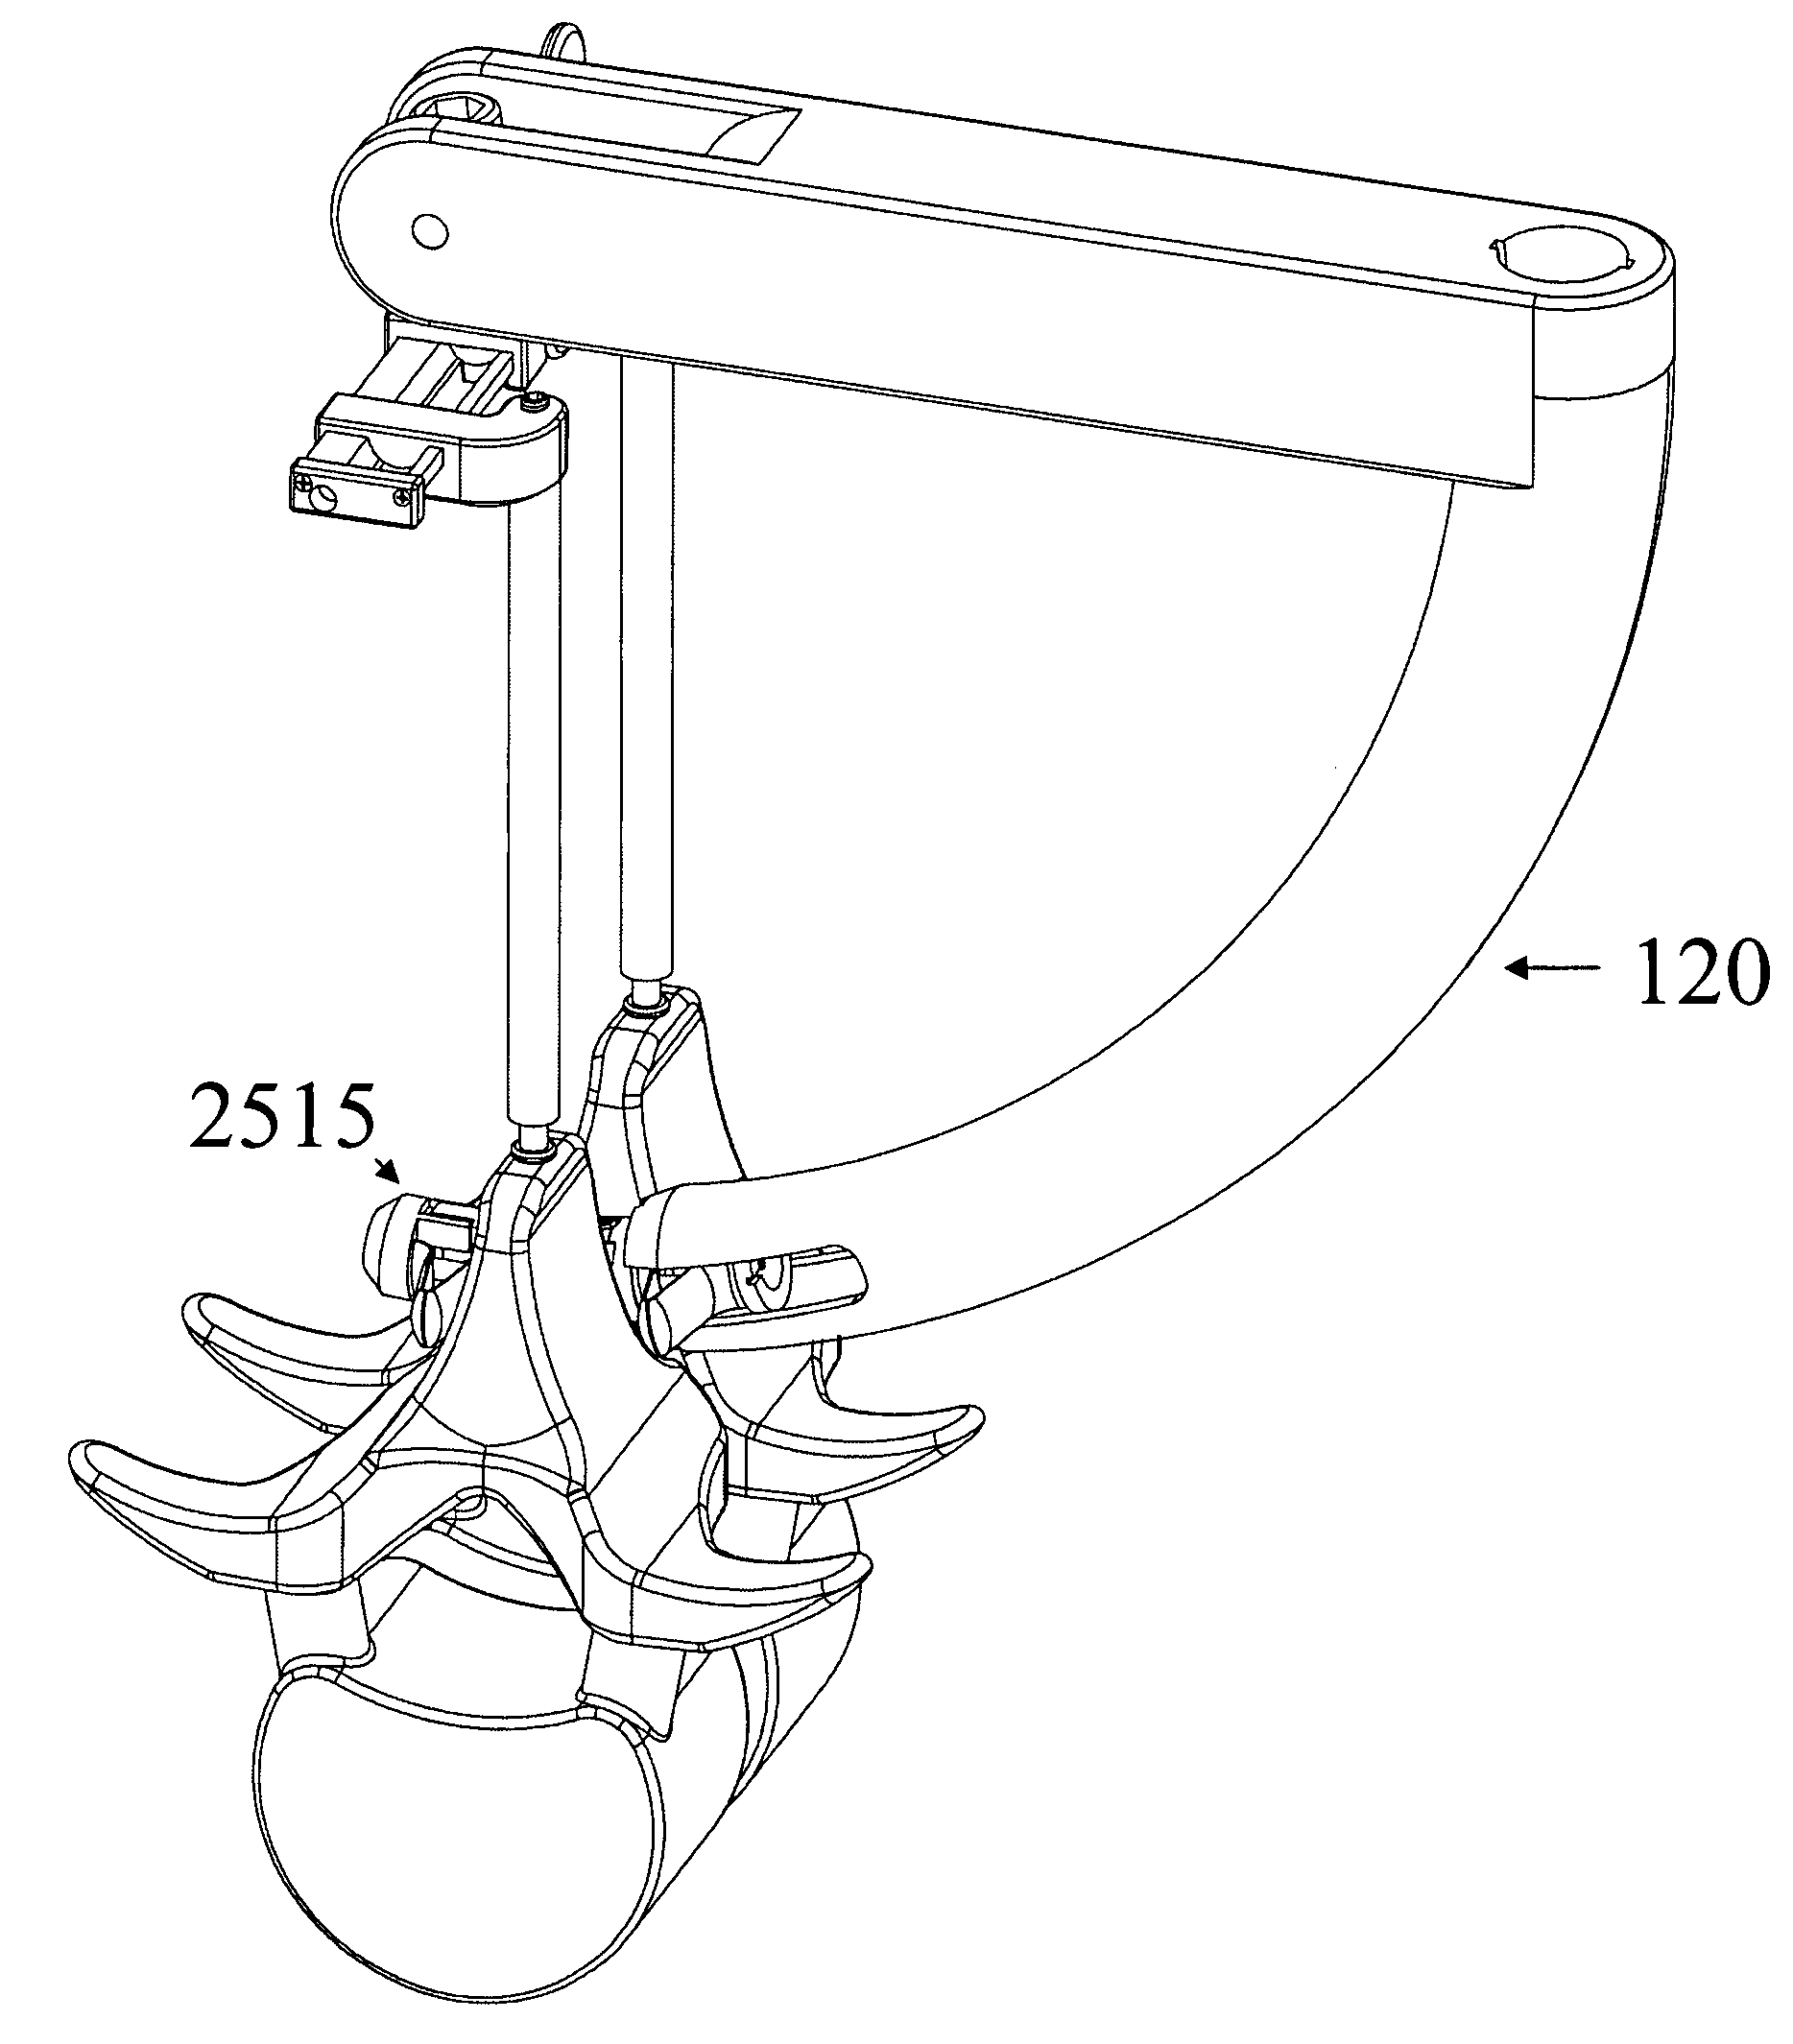 Devices and methods for inter-vertebral orthopedic device placement